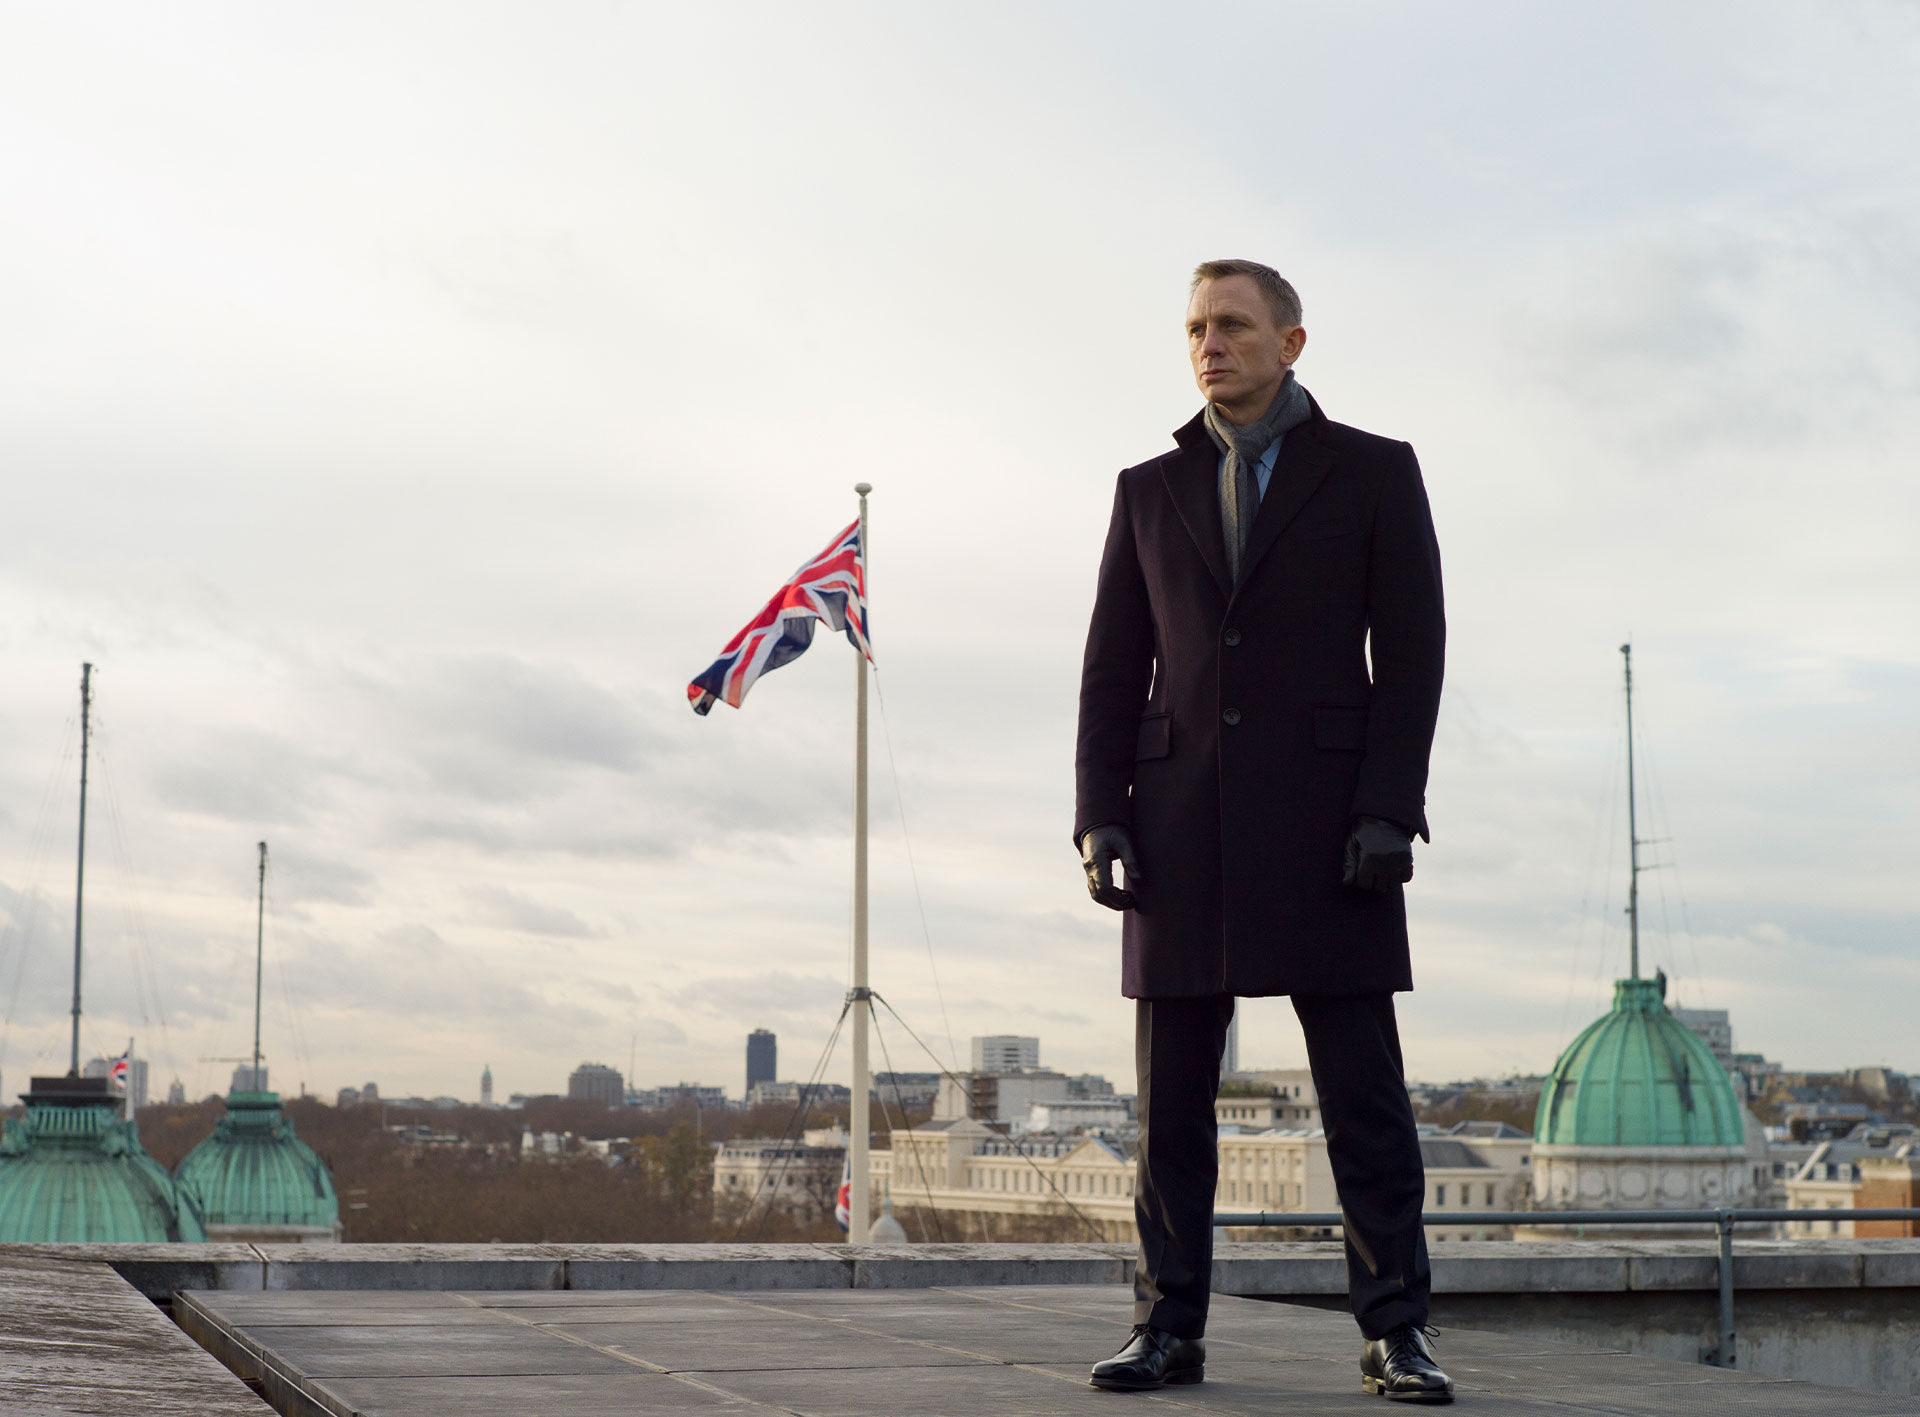 What’s next for James Bond? Franchise producer Barbara Broccoli opens up